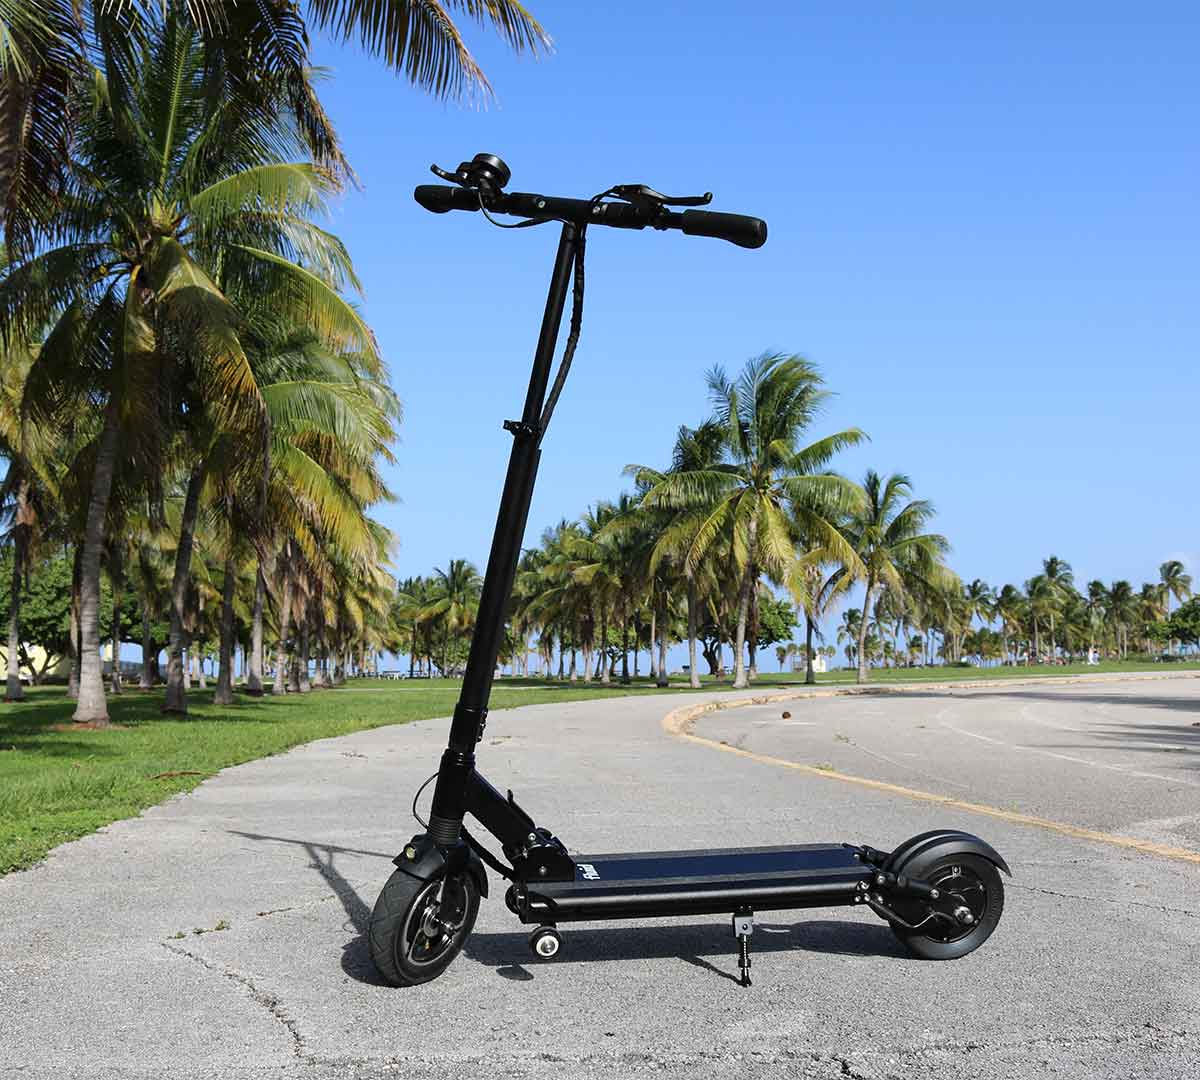 Black electric scooter parked on a sunny park pathway with lush palm trees in the background, symbolizing eco-friendly transportation